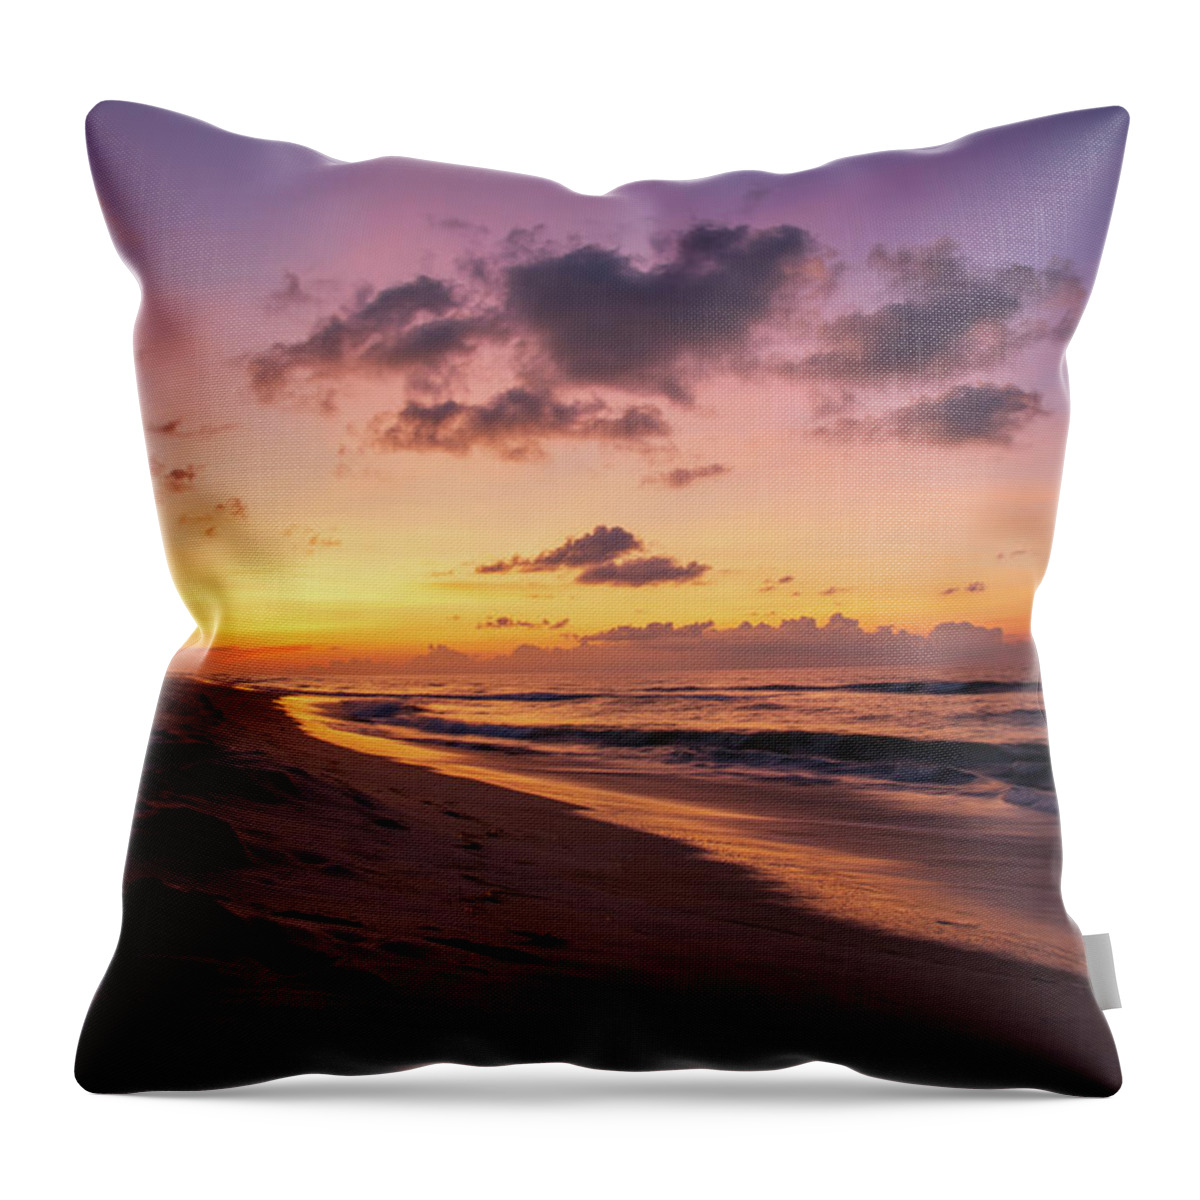 Ocracoke Throw Pillow featuring the photograph I Love Ocracoke by Liz Albro